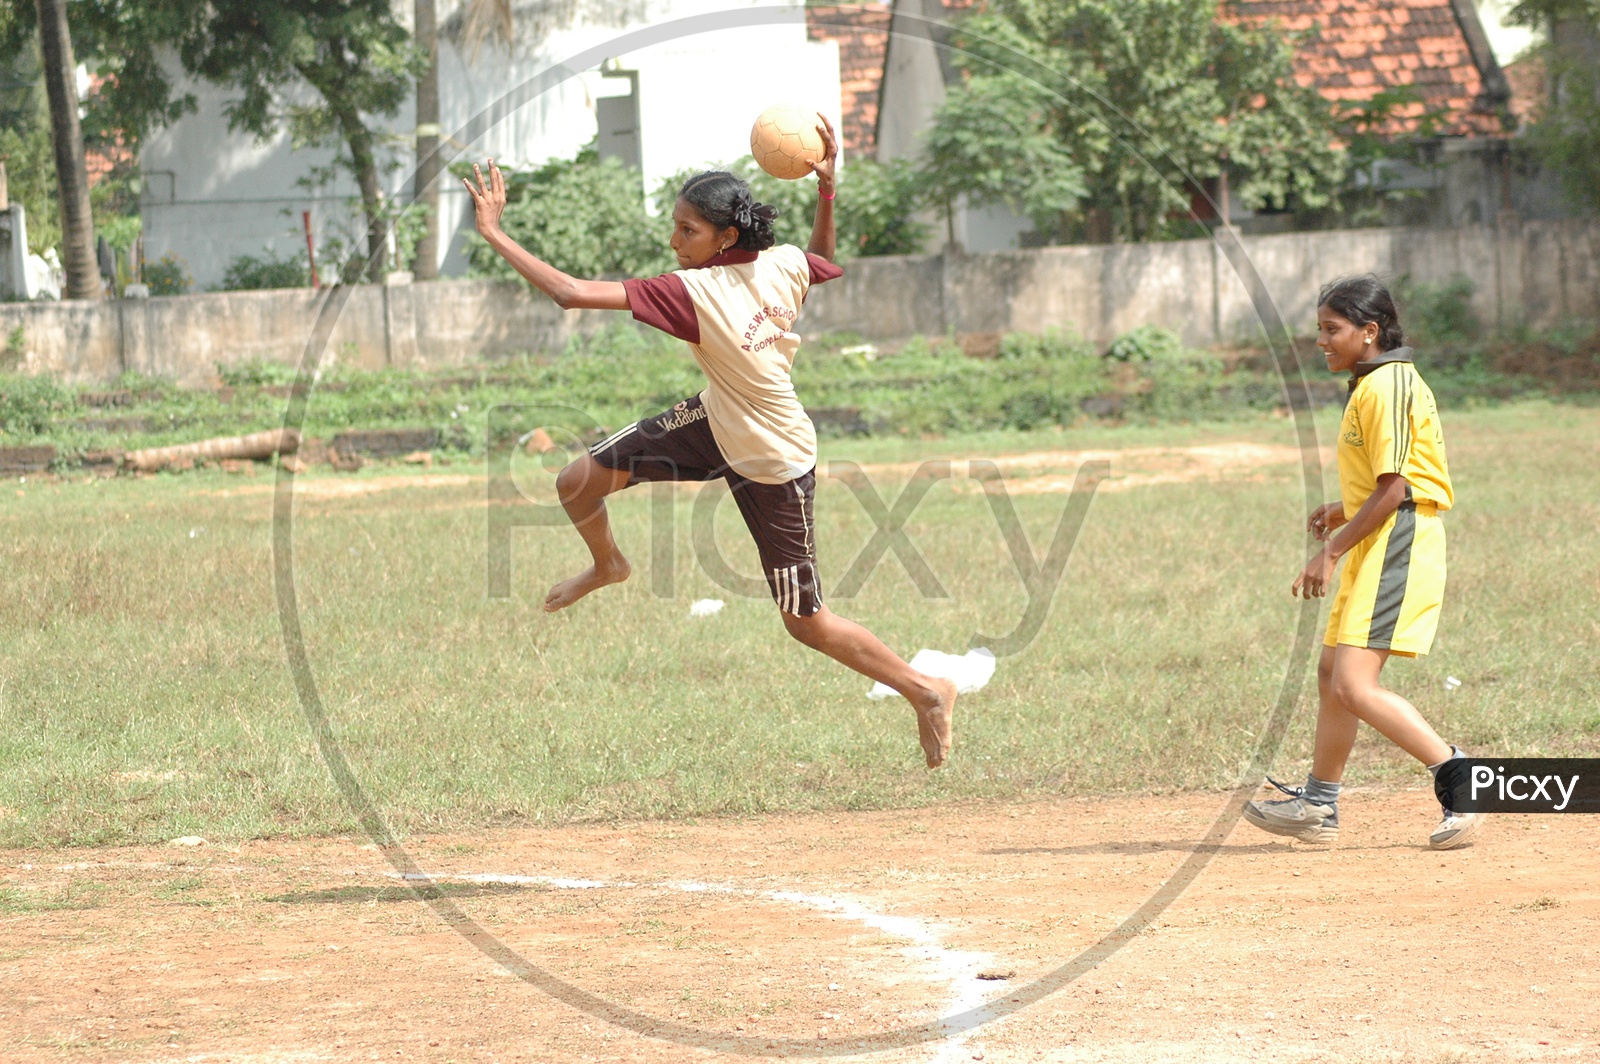 Throwball Rules - Learn how to play Throwball